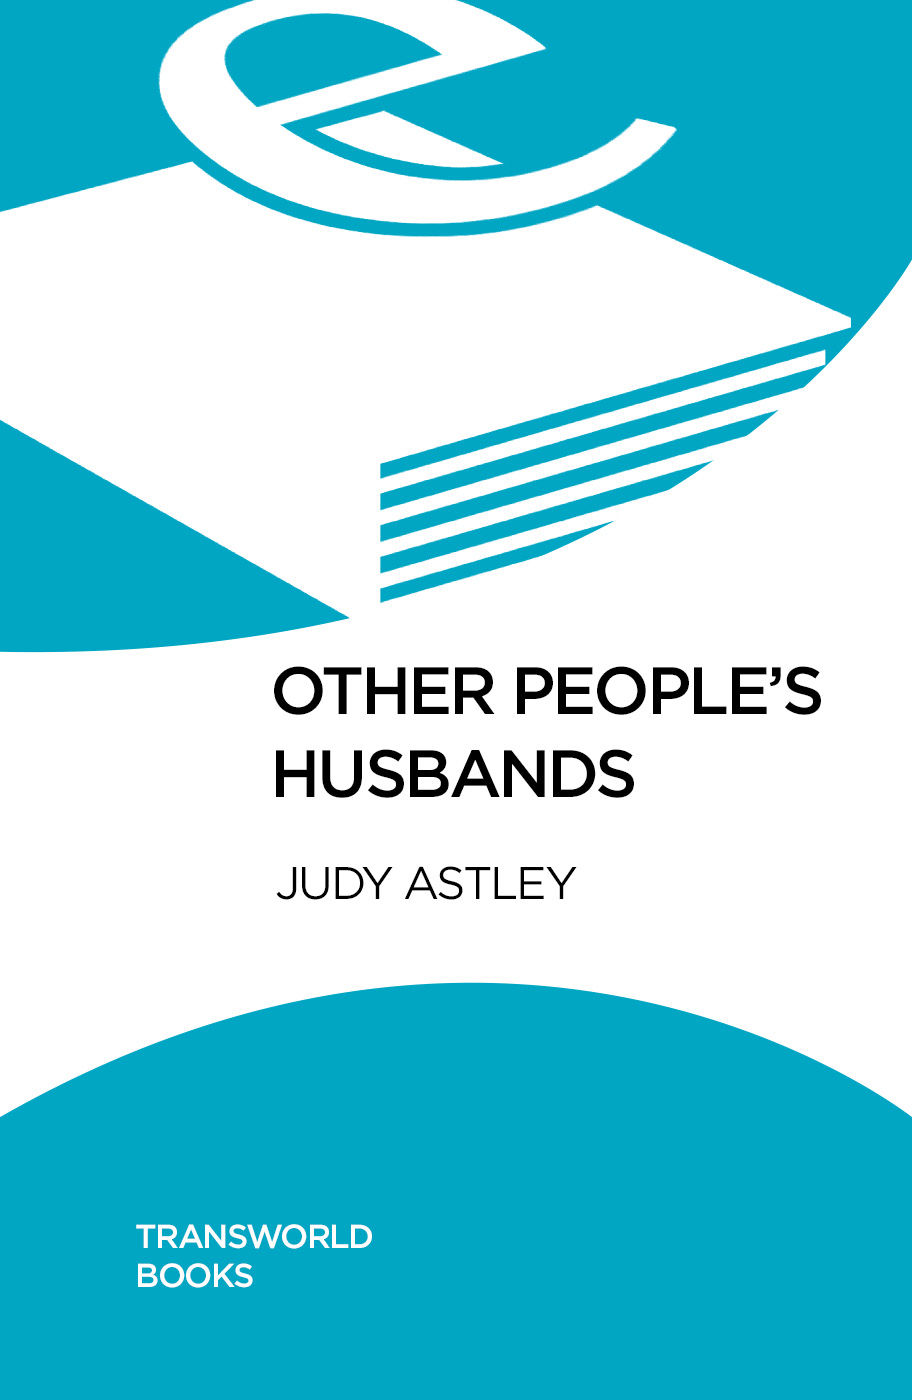 Other People's Husbands by Judy Astley